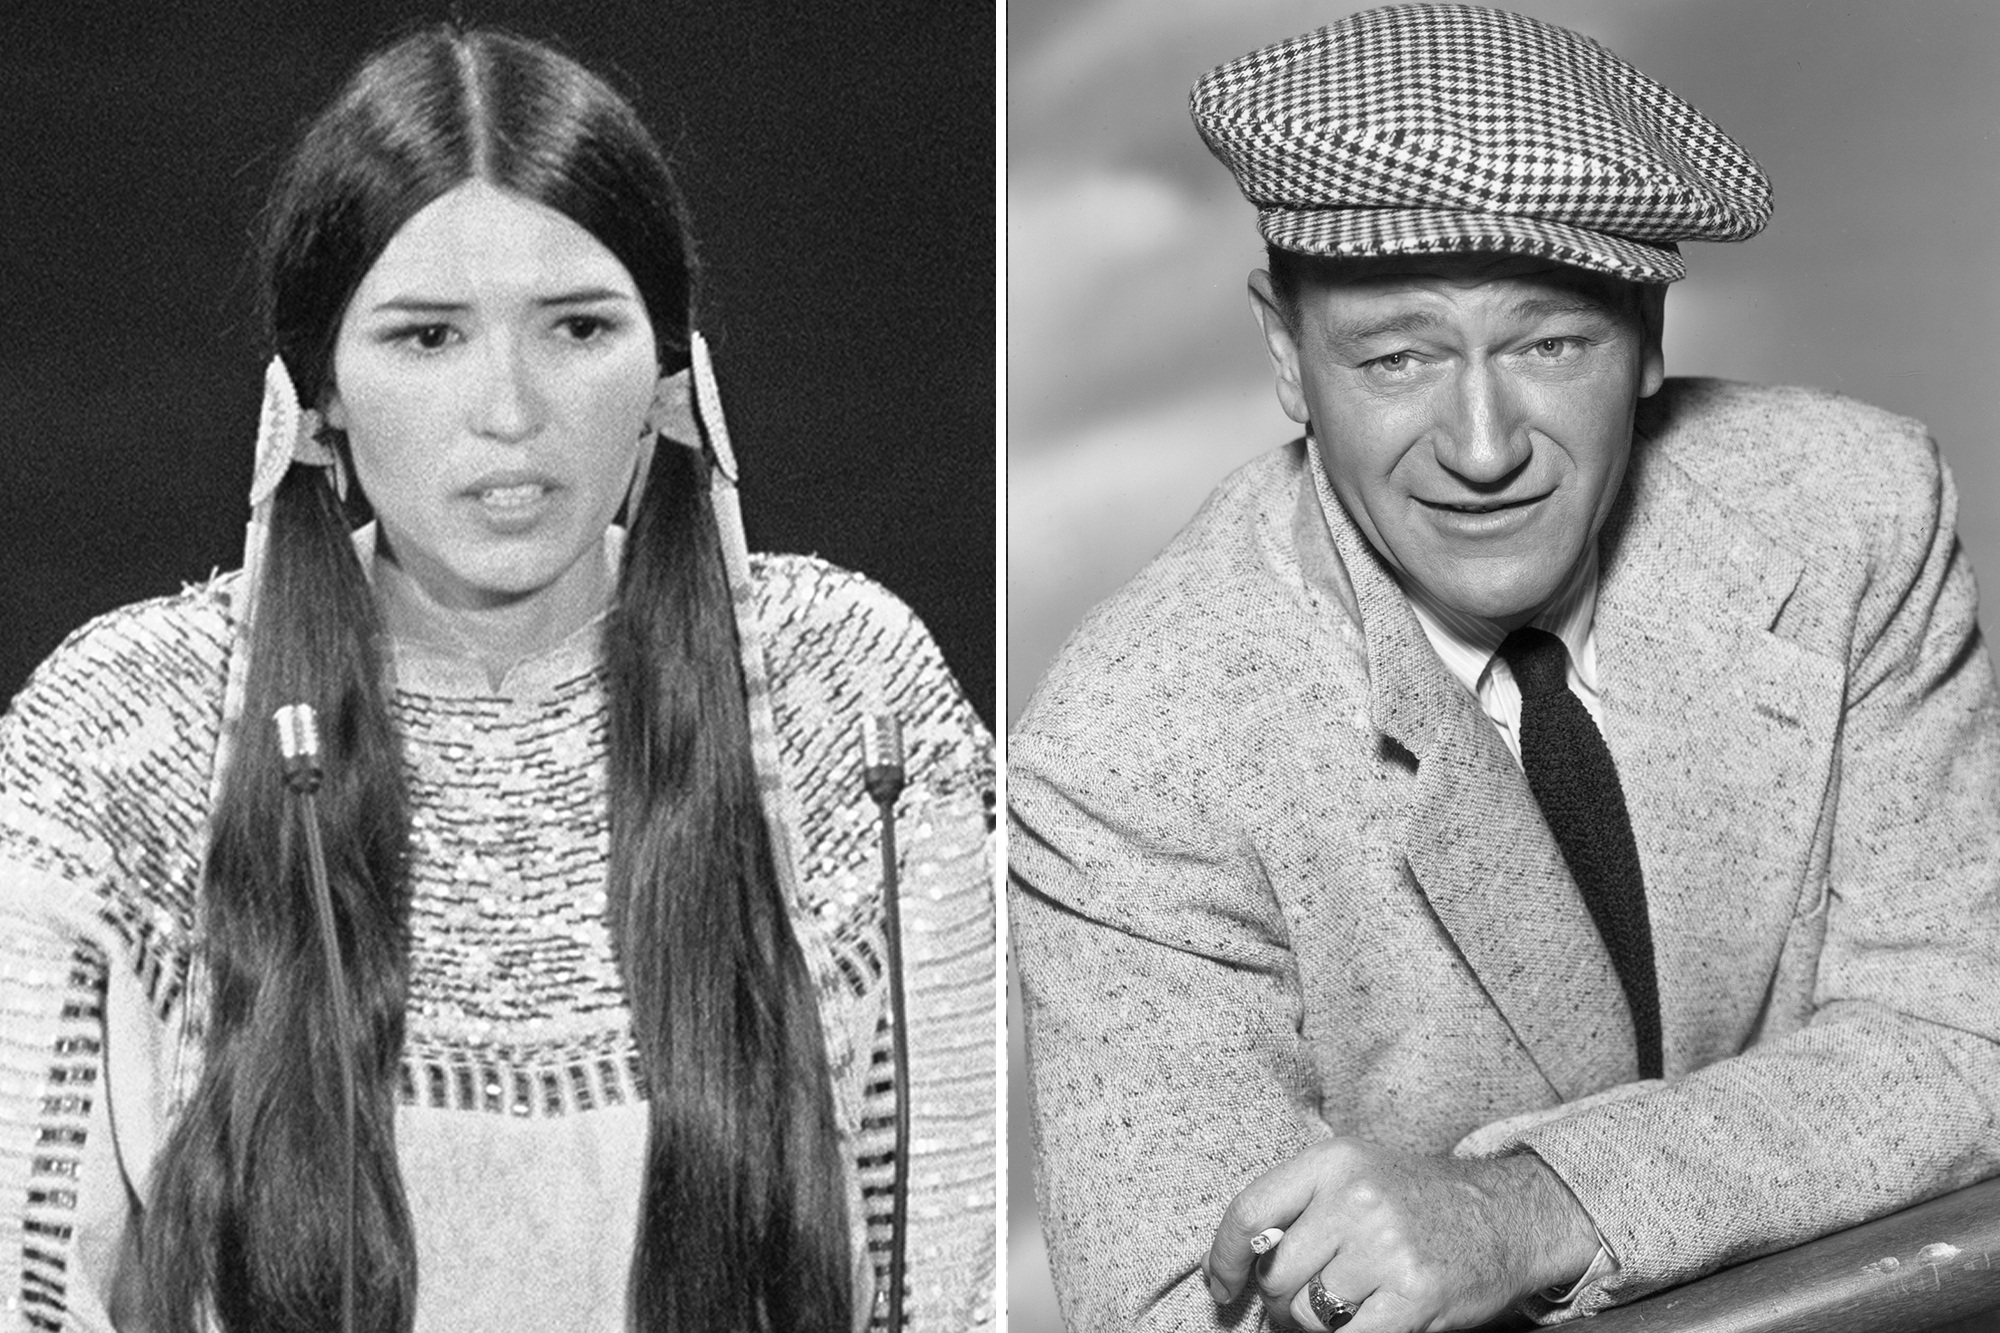 "[John Wayne] did not like what I was saying up at the podium," Sacheen Littlefeather said of her experience at the 1973 Oscars.